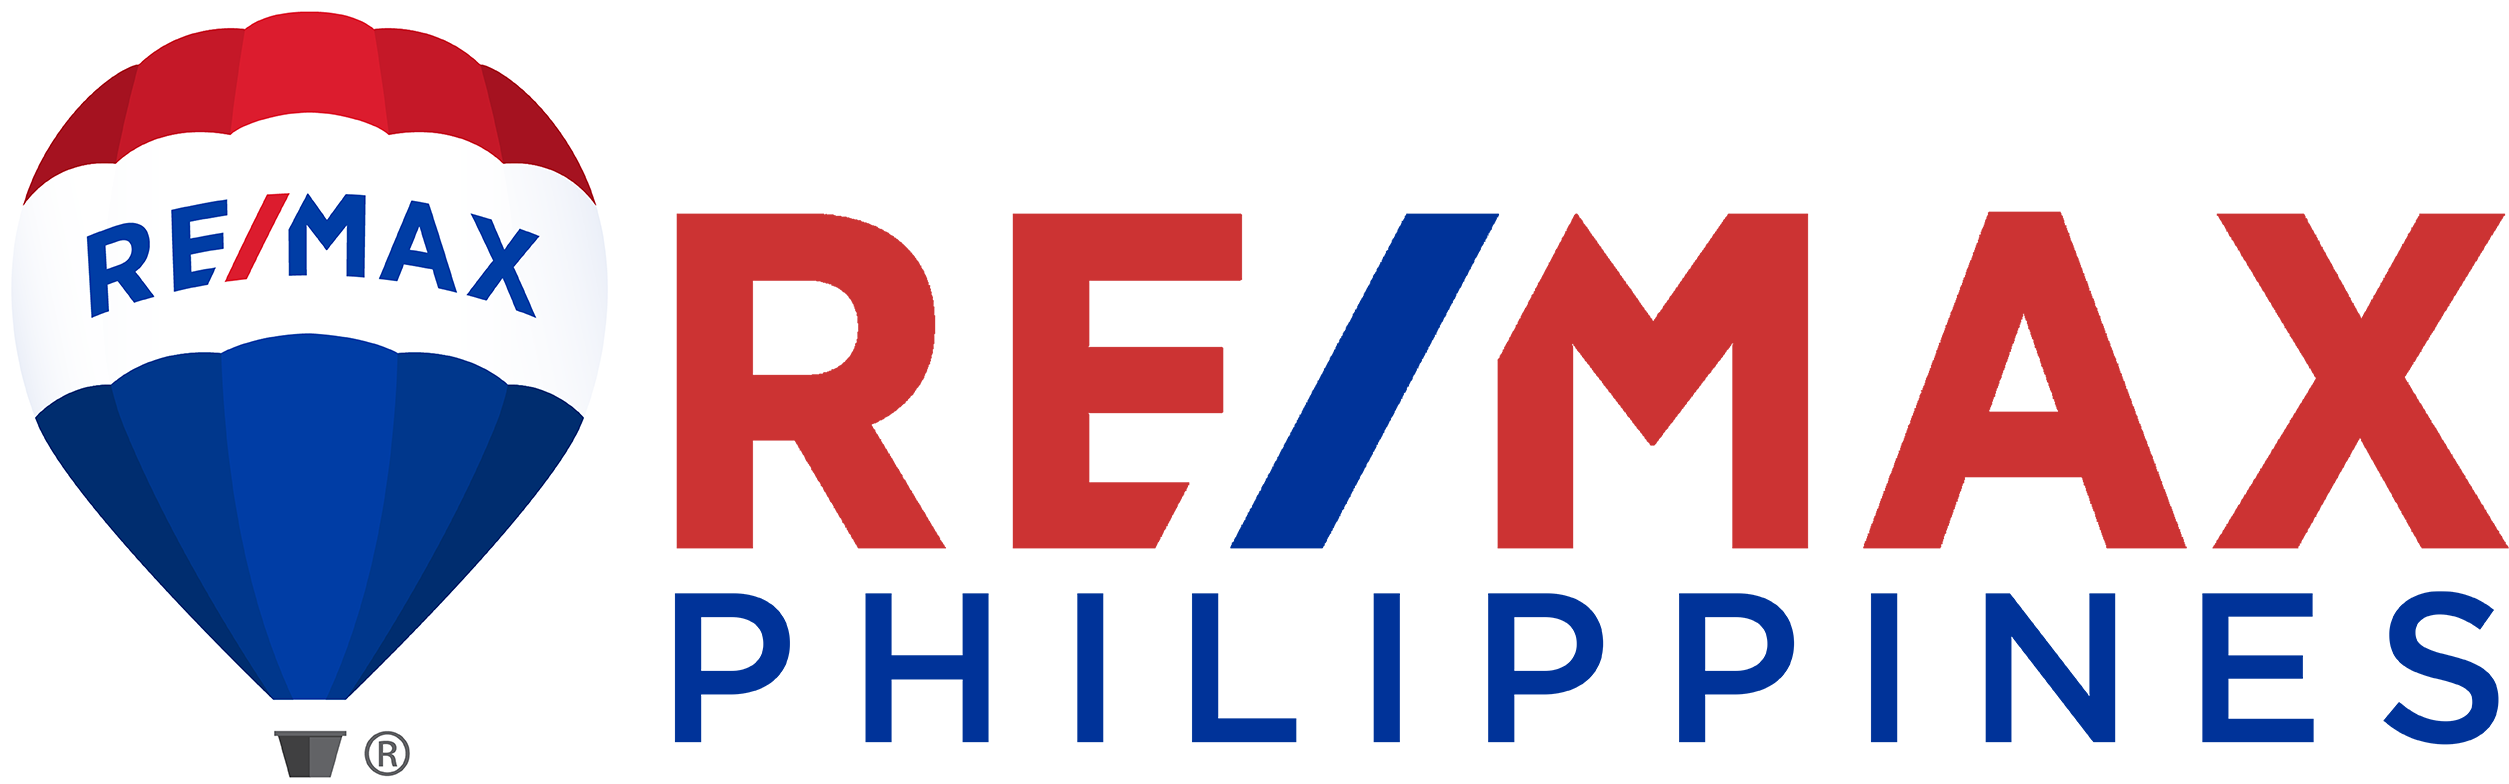 Re/max Philippines - Remax Philippines Logo Clipart (2676x1270), Png Download